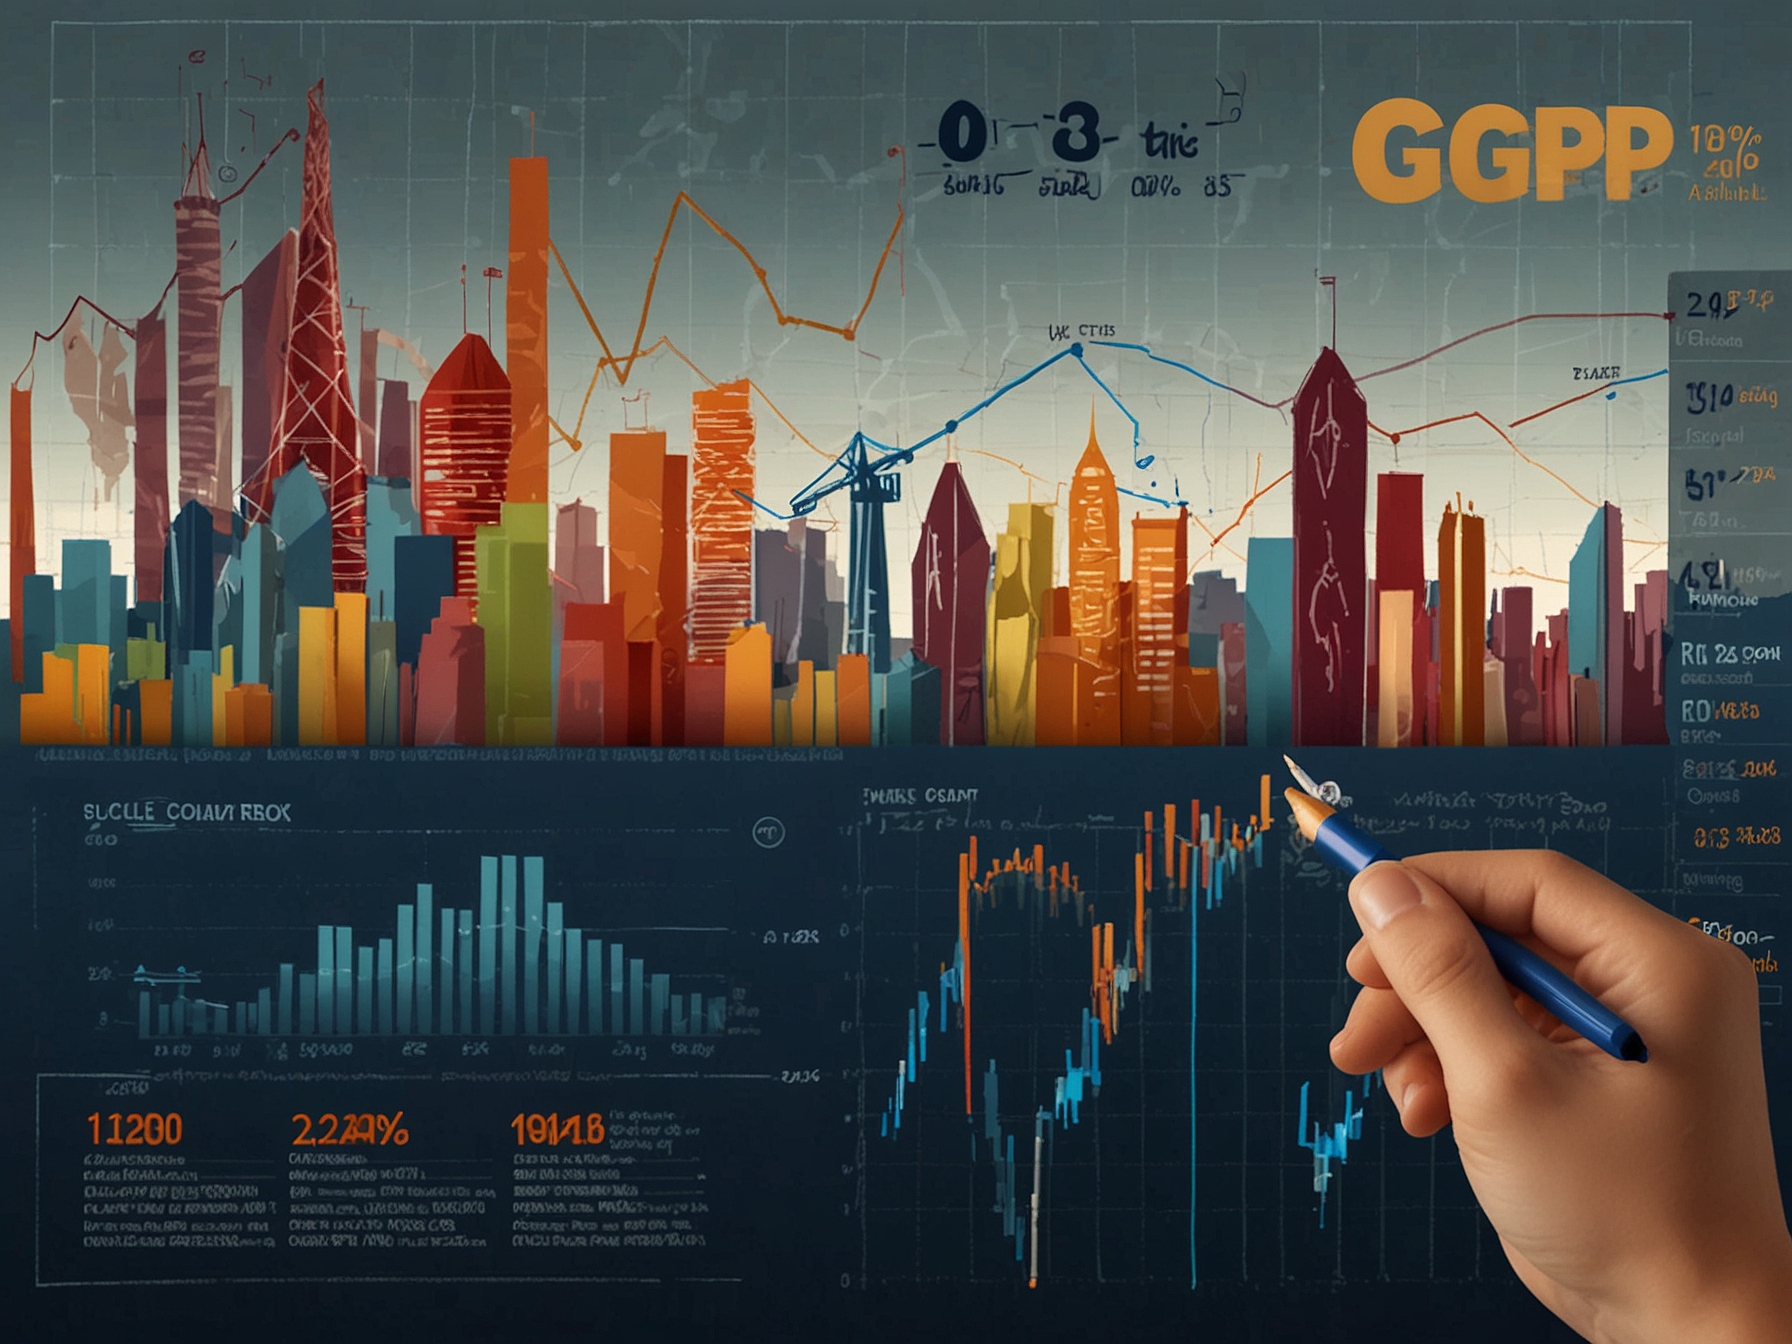 A graphic showcasing key economic indicators such as GDP growth and inflation rates available on the DBIE portal, underlining the importance of timely and accurate data for research and policy-making.